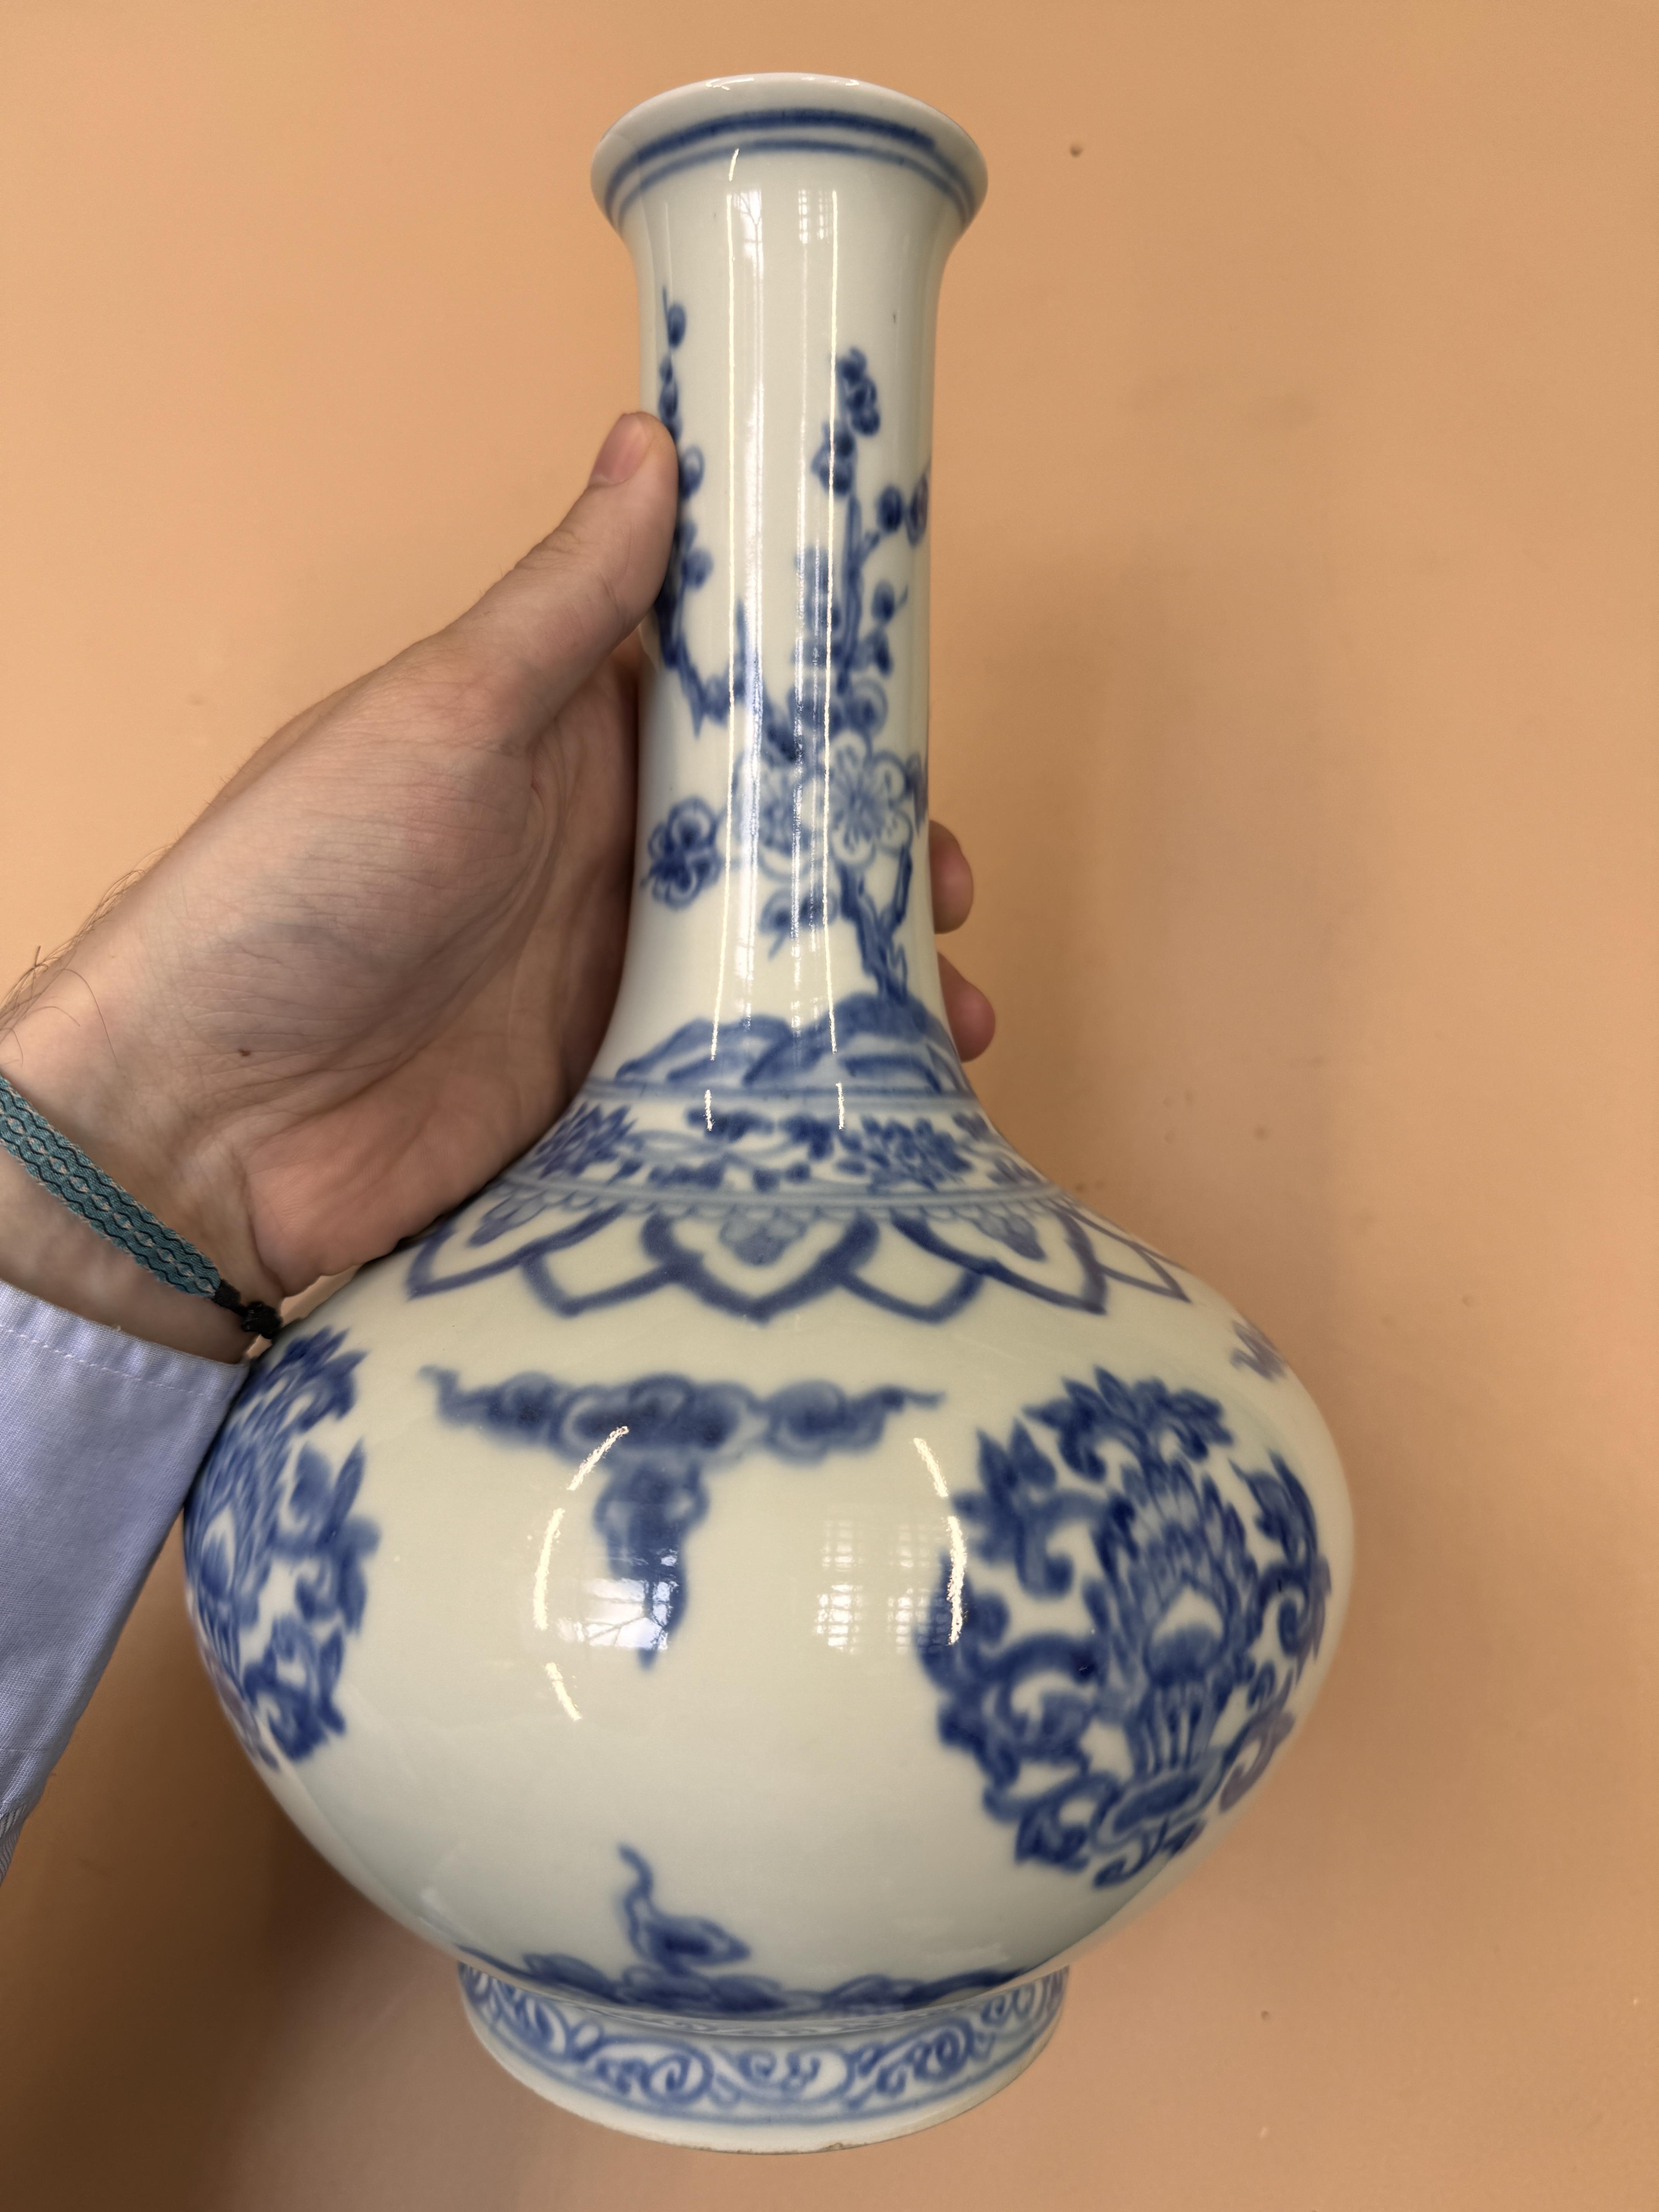 A CHINESE BLUE AND WHITE 'LOTUS' BOTTLE VASE 二十世紀 青花團蓮紋瓶 - Image 10 of 15